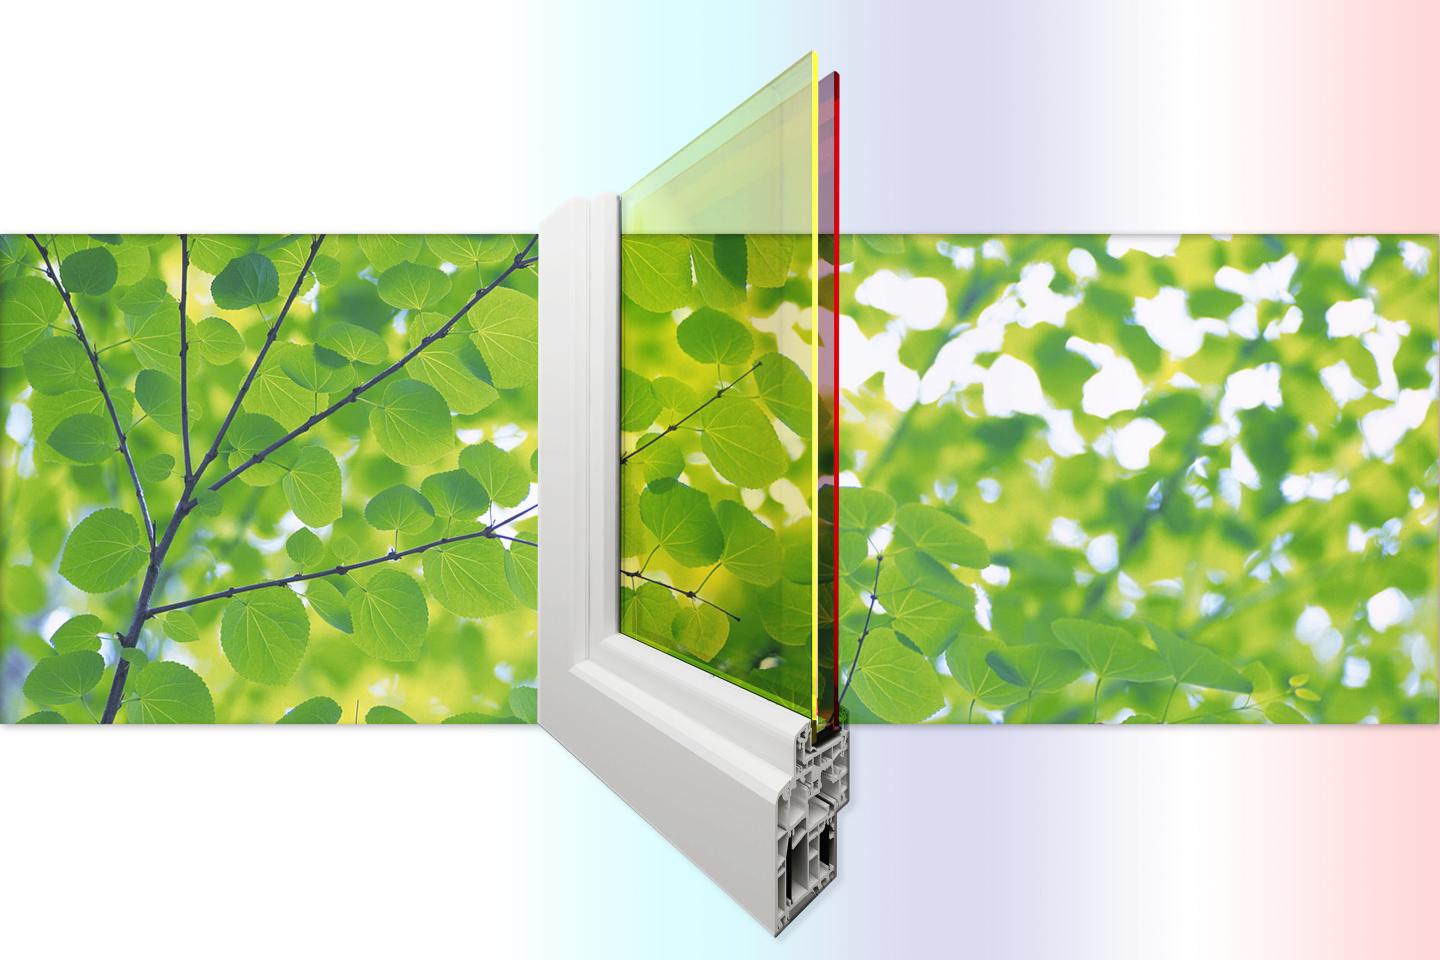 Inexpensive double-pane solar windows made with low-cost quantum dots